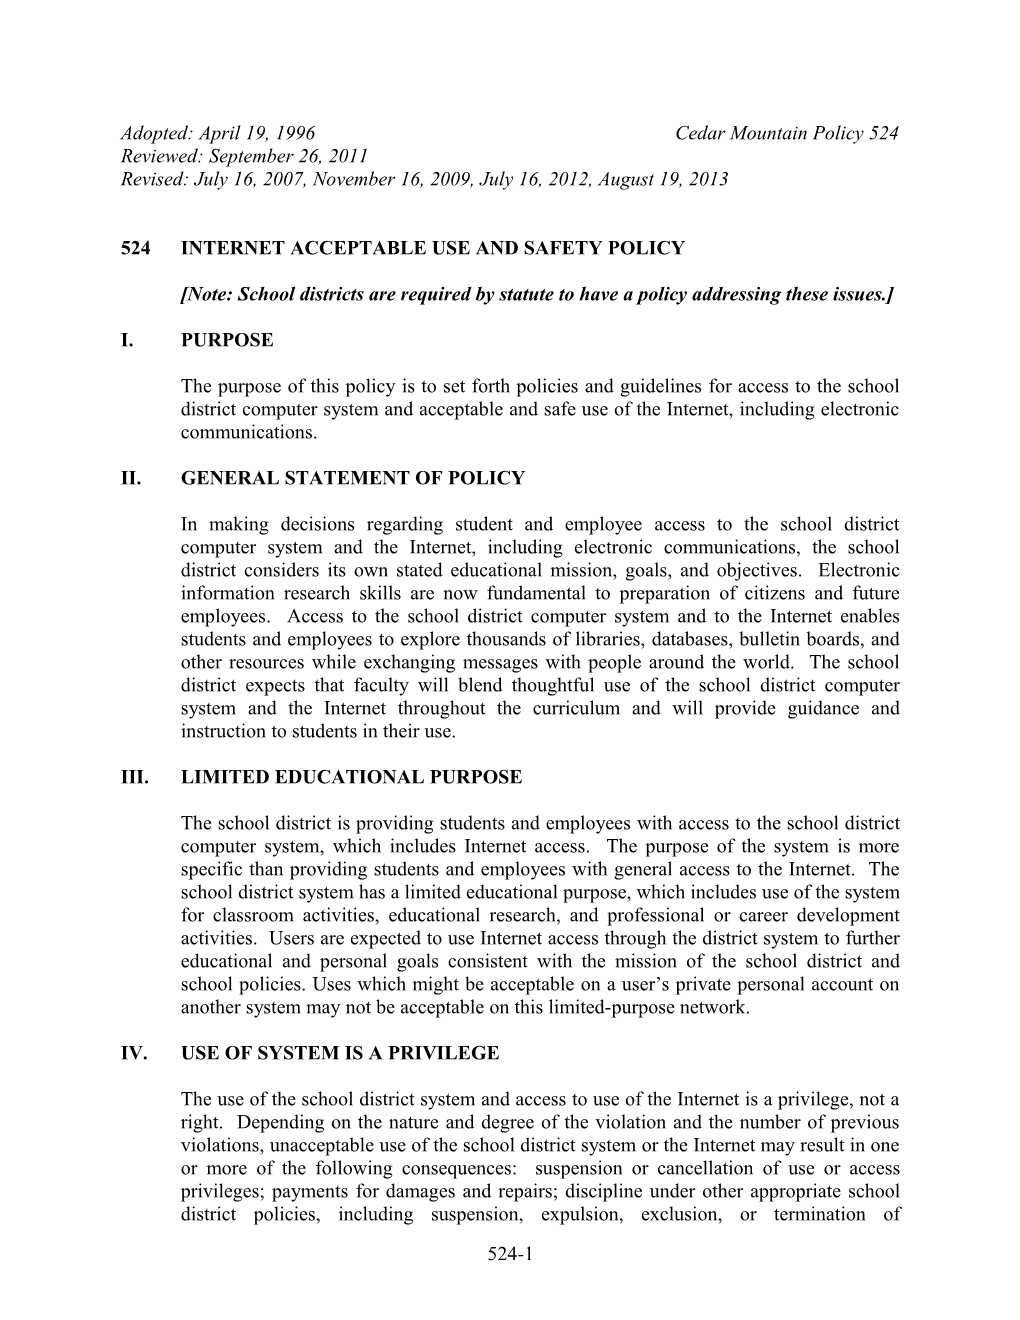 524Internet Acceptable Use and Safety Policy